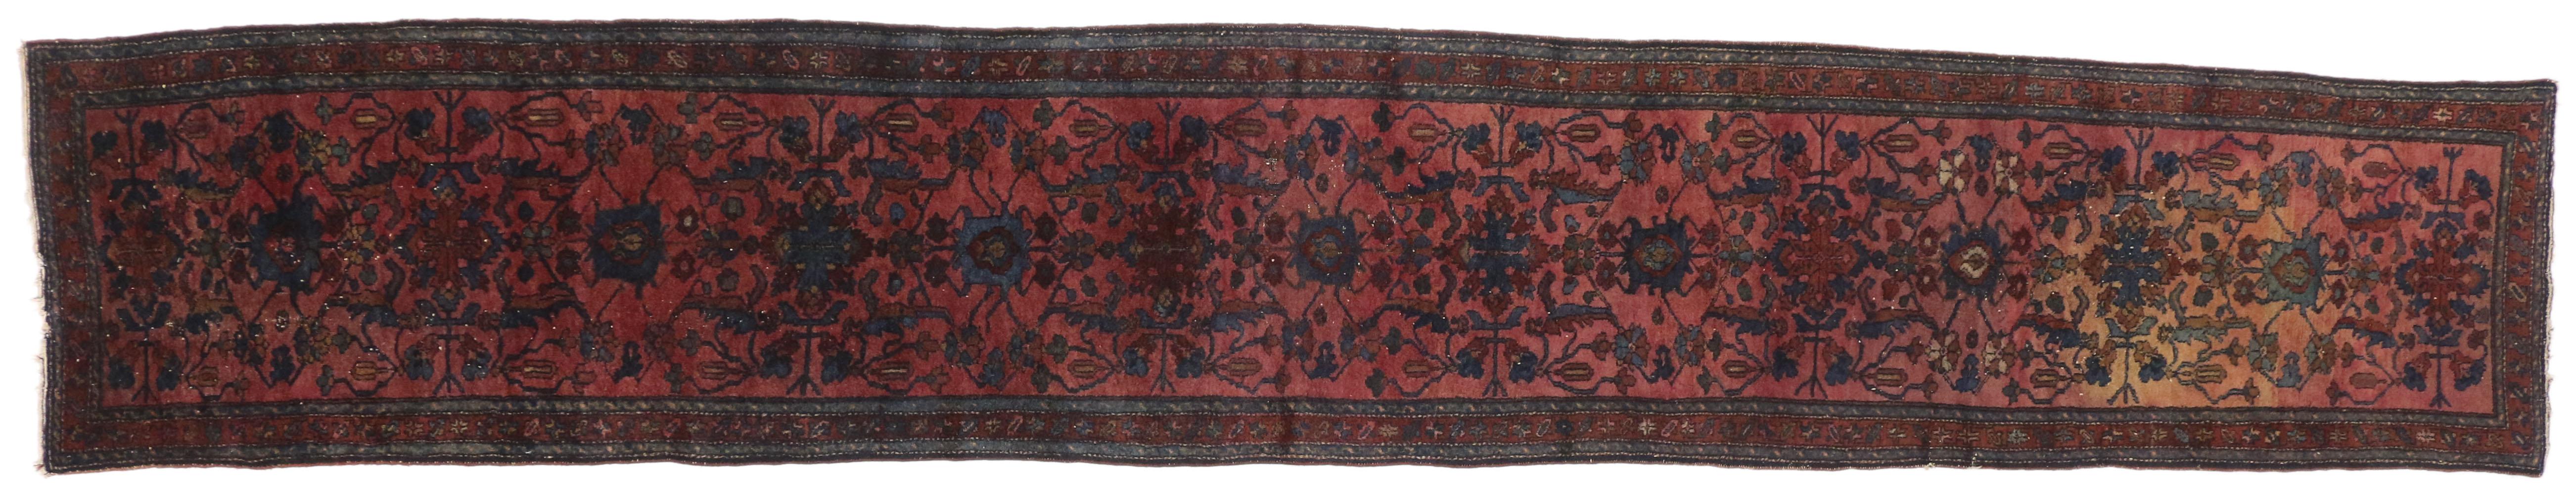 Antique Persian Lilihan Long Hallway Runner with Bohemian Regency Style For Sale 4